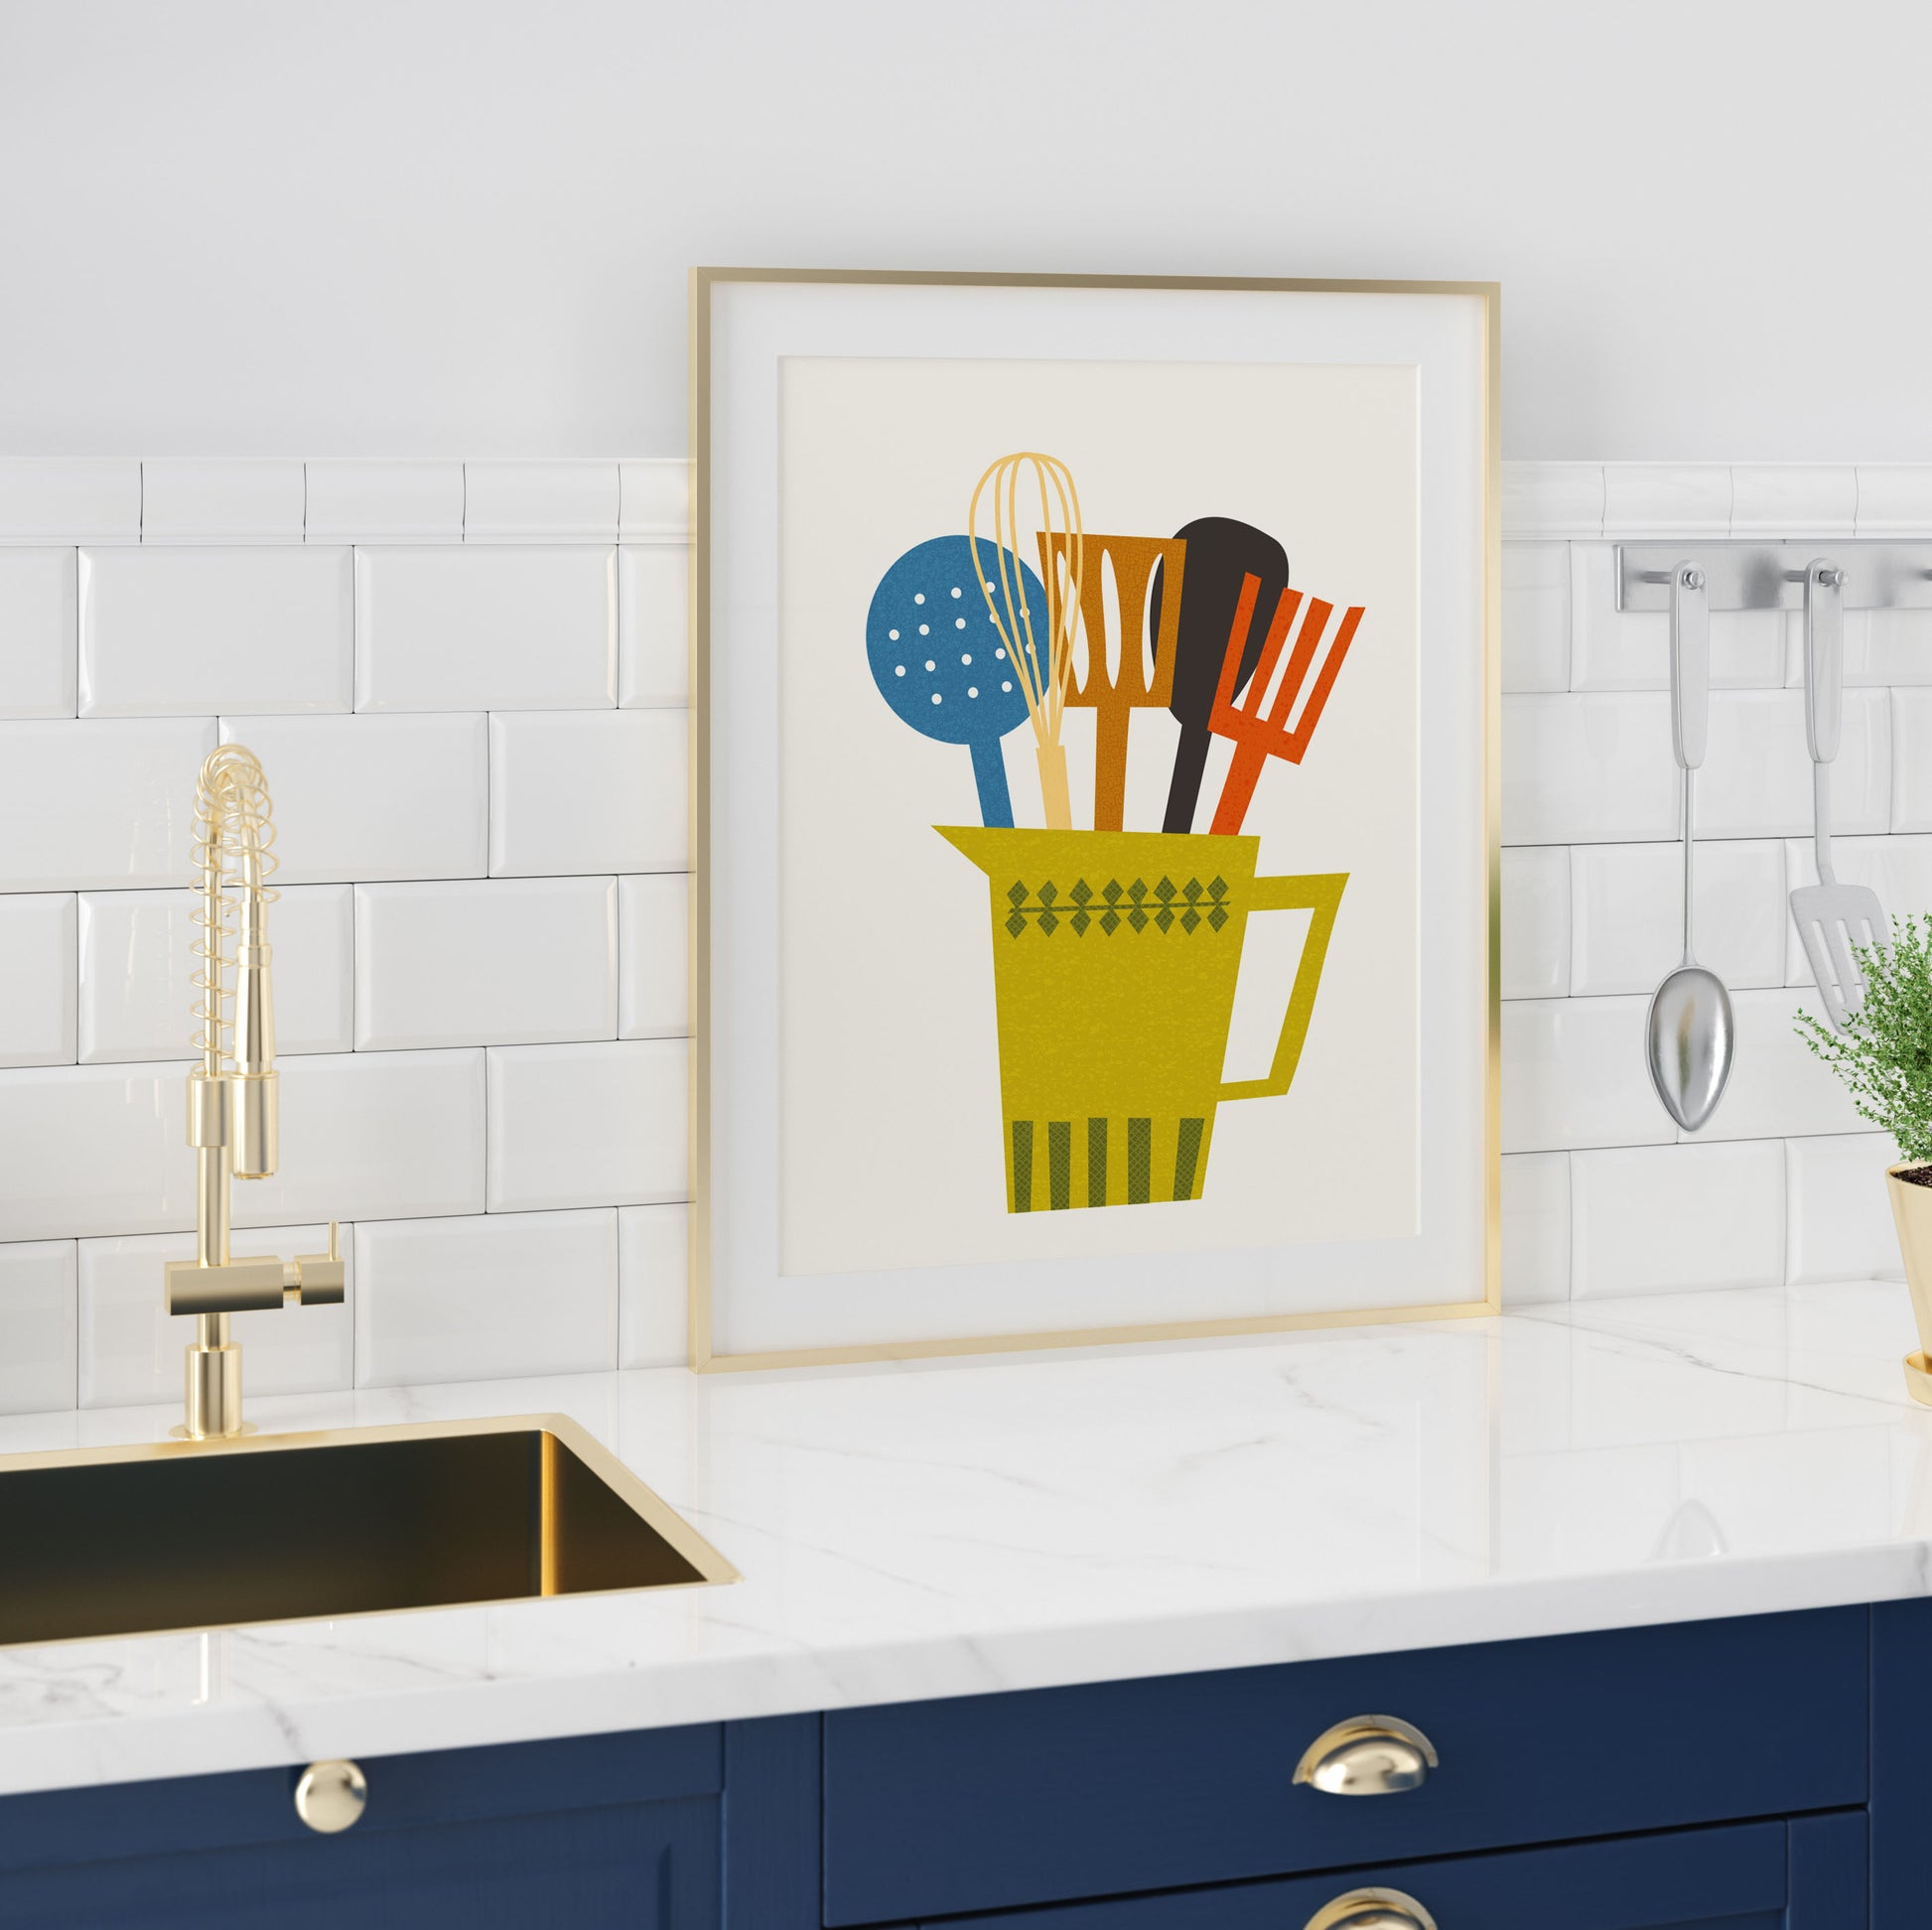 Kitchen poster in a mid century modern style with kitchen utensils in a retro style pot